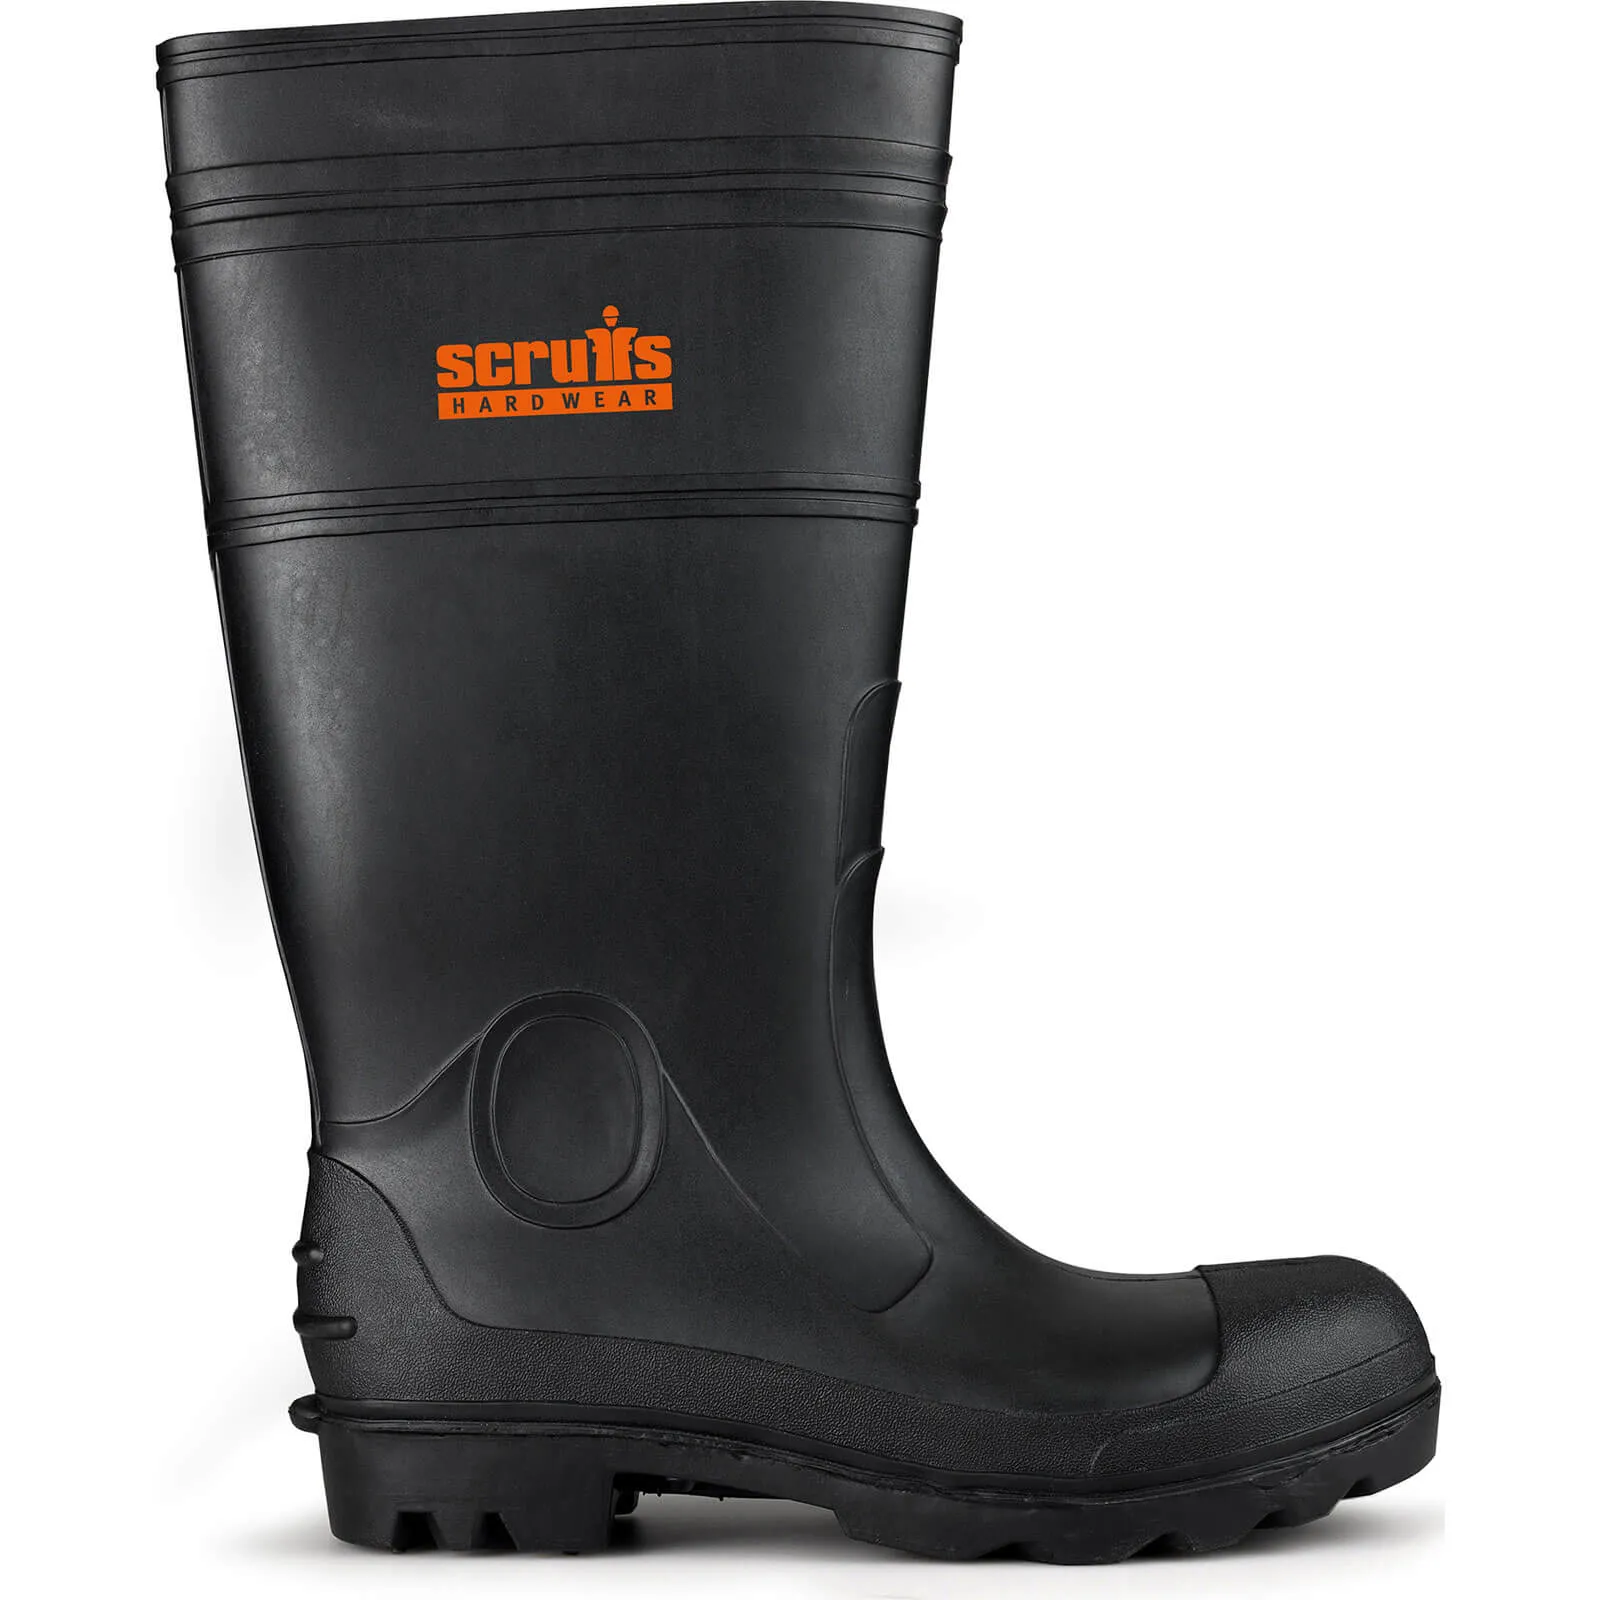 Scruffs Hayeswater Rigger Safety Boot - Black, Size 12